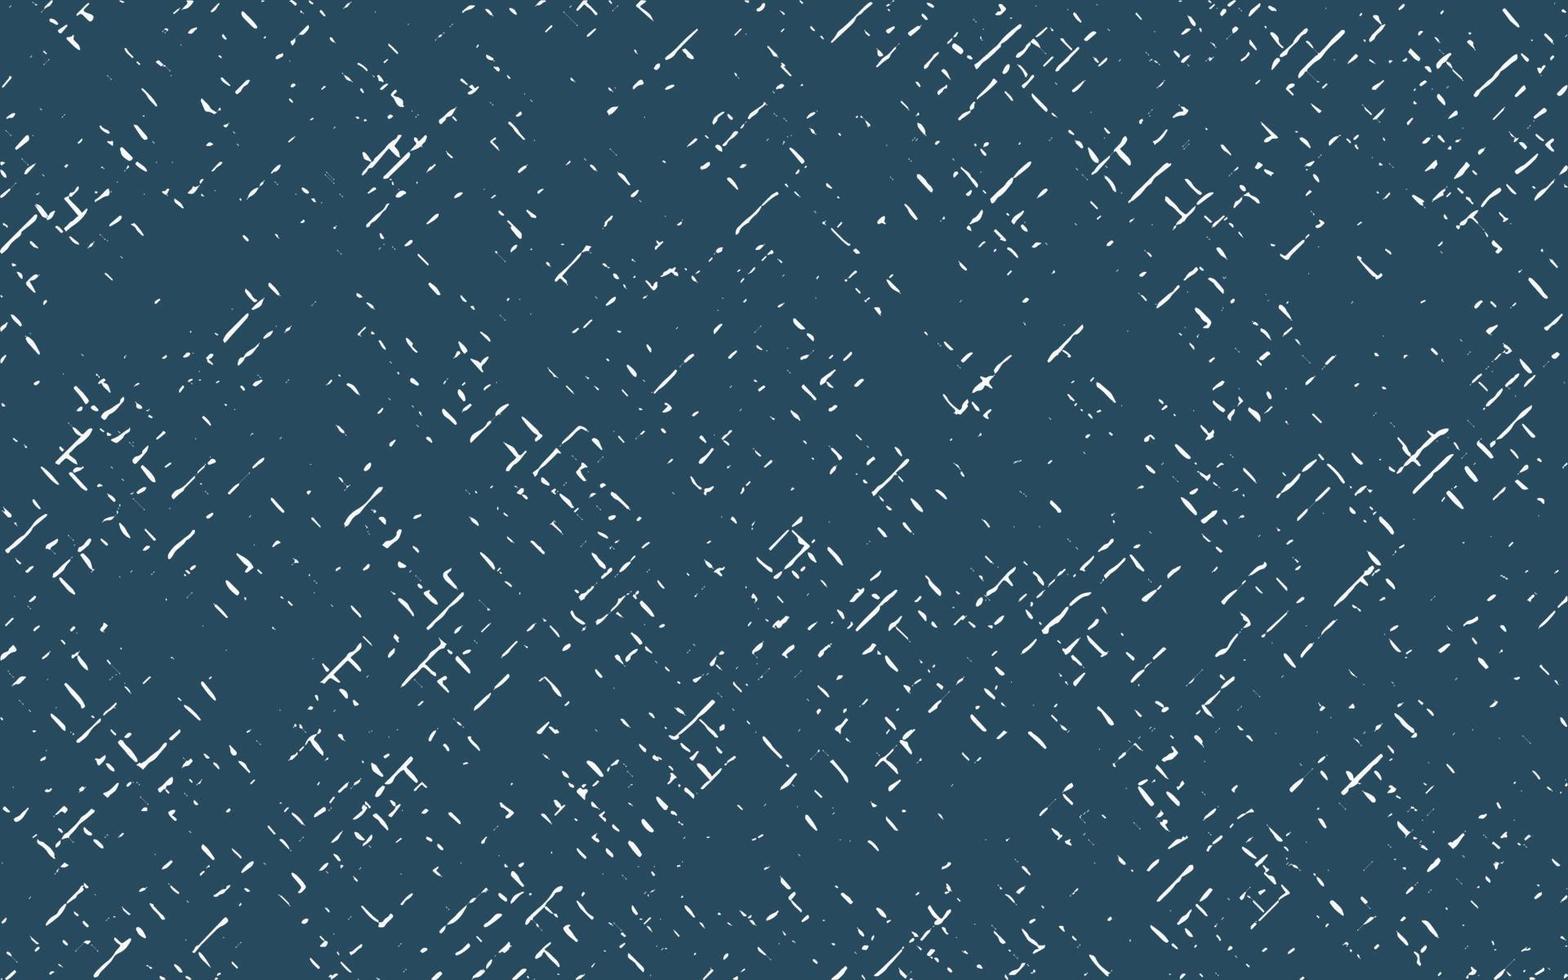 Grunge Vector Texture. Distress Background. Scratched, Cross Line Pattern, Vintage Effect with Mate Blue Color